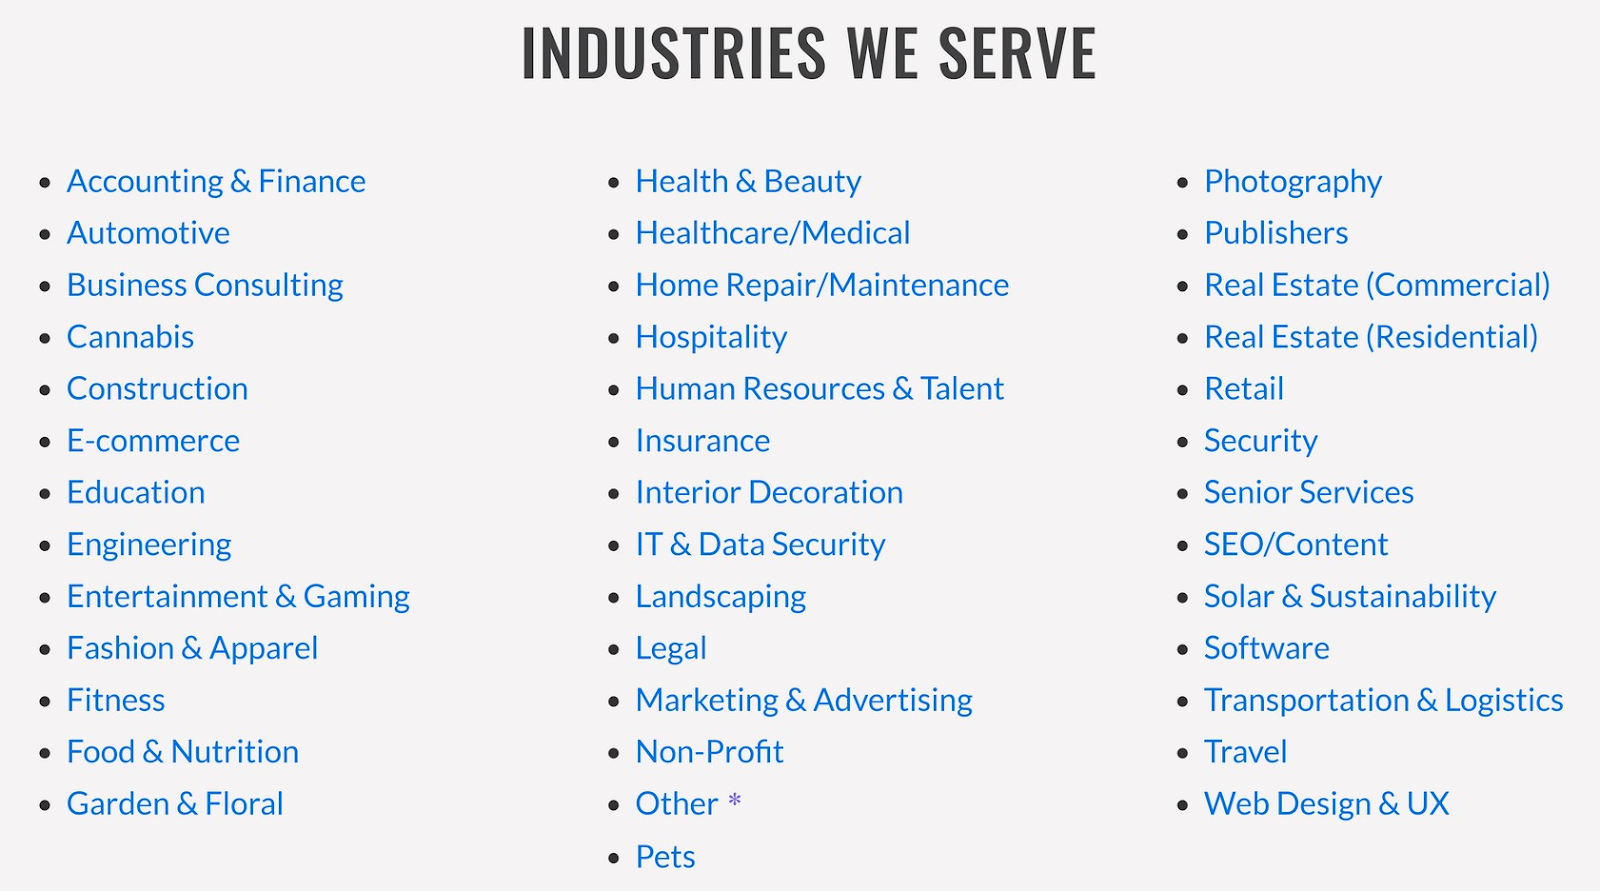 "Industries we serve" section on Verblio page